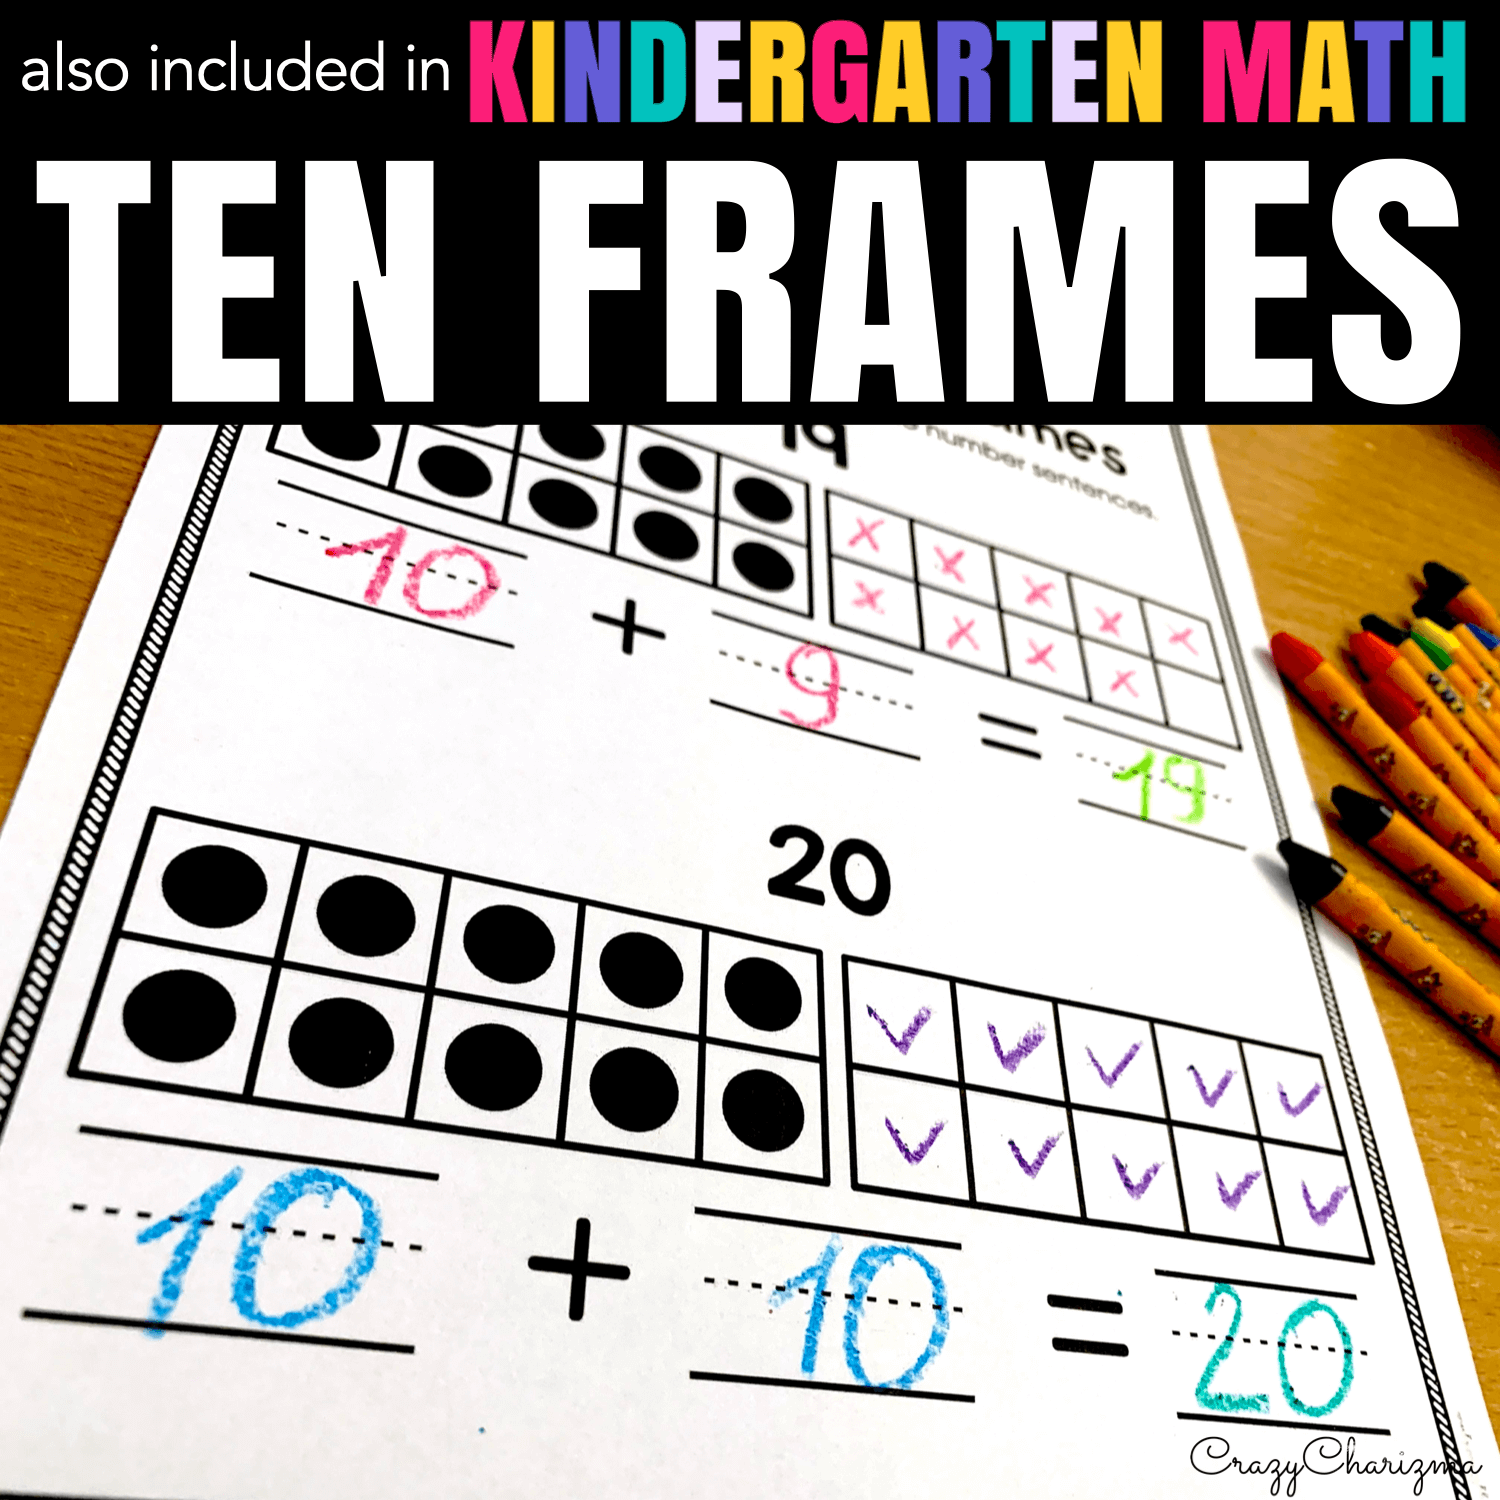 Practice ten frame addition for teen numbers. Students will learn that a teen number is ten and ___ more with the help of a ten frame visual.